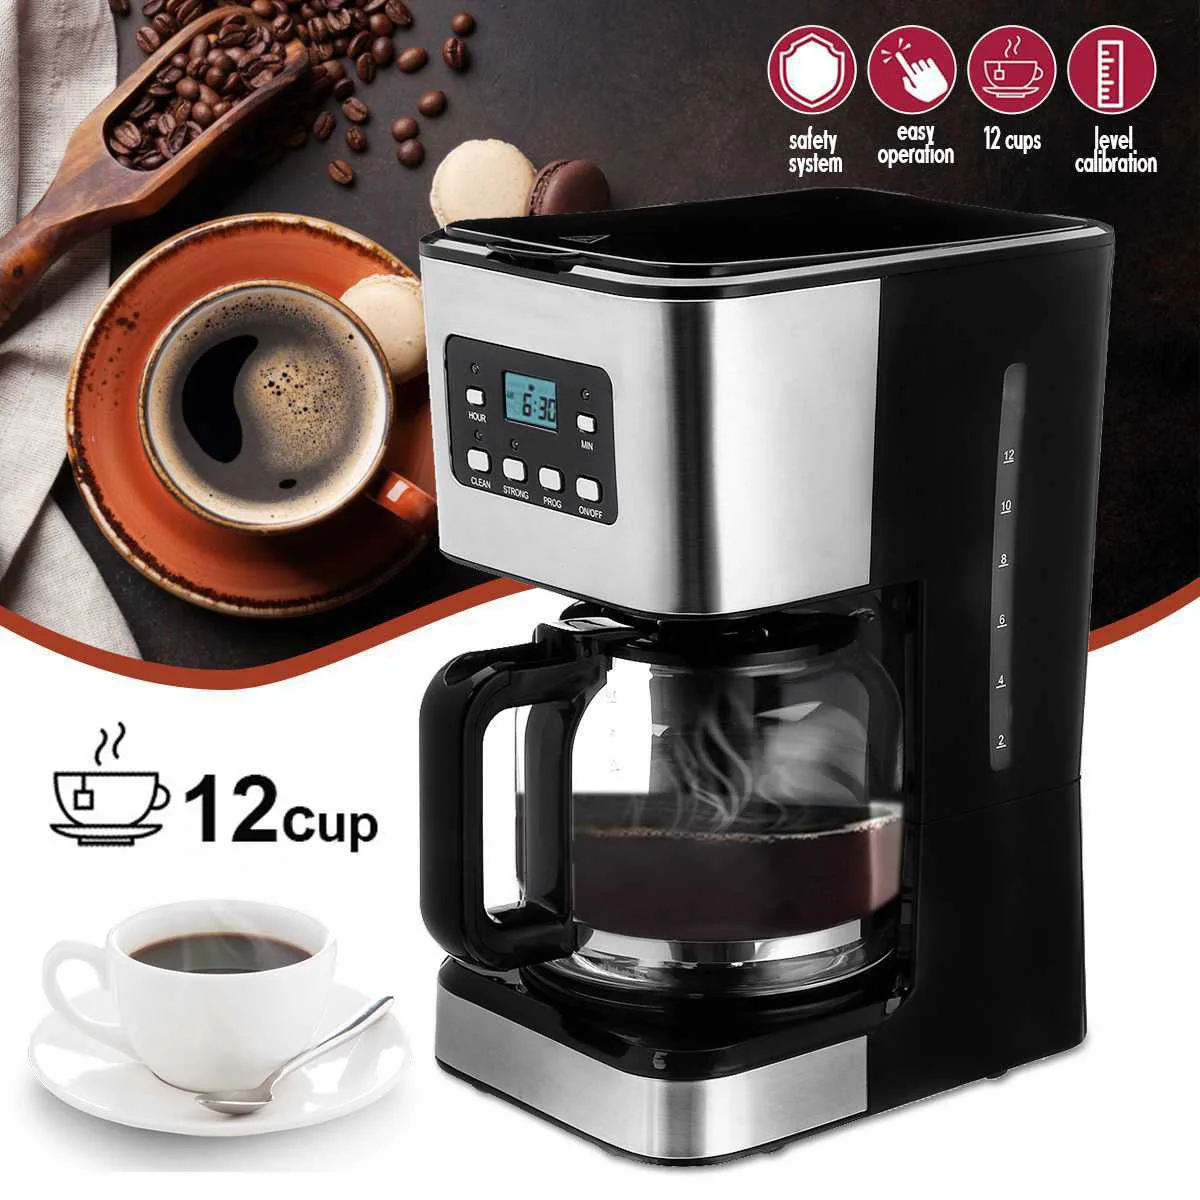 

Coffee Machine 12 Cup Espresso Coffee Maker Machine 220V-240V Household Office Coffee Maker With Steam for Cappuccino Latte